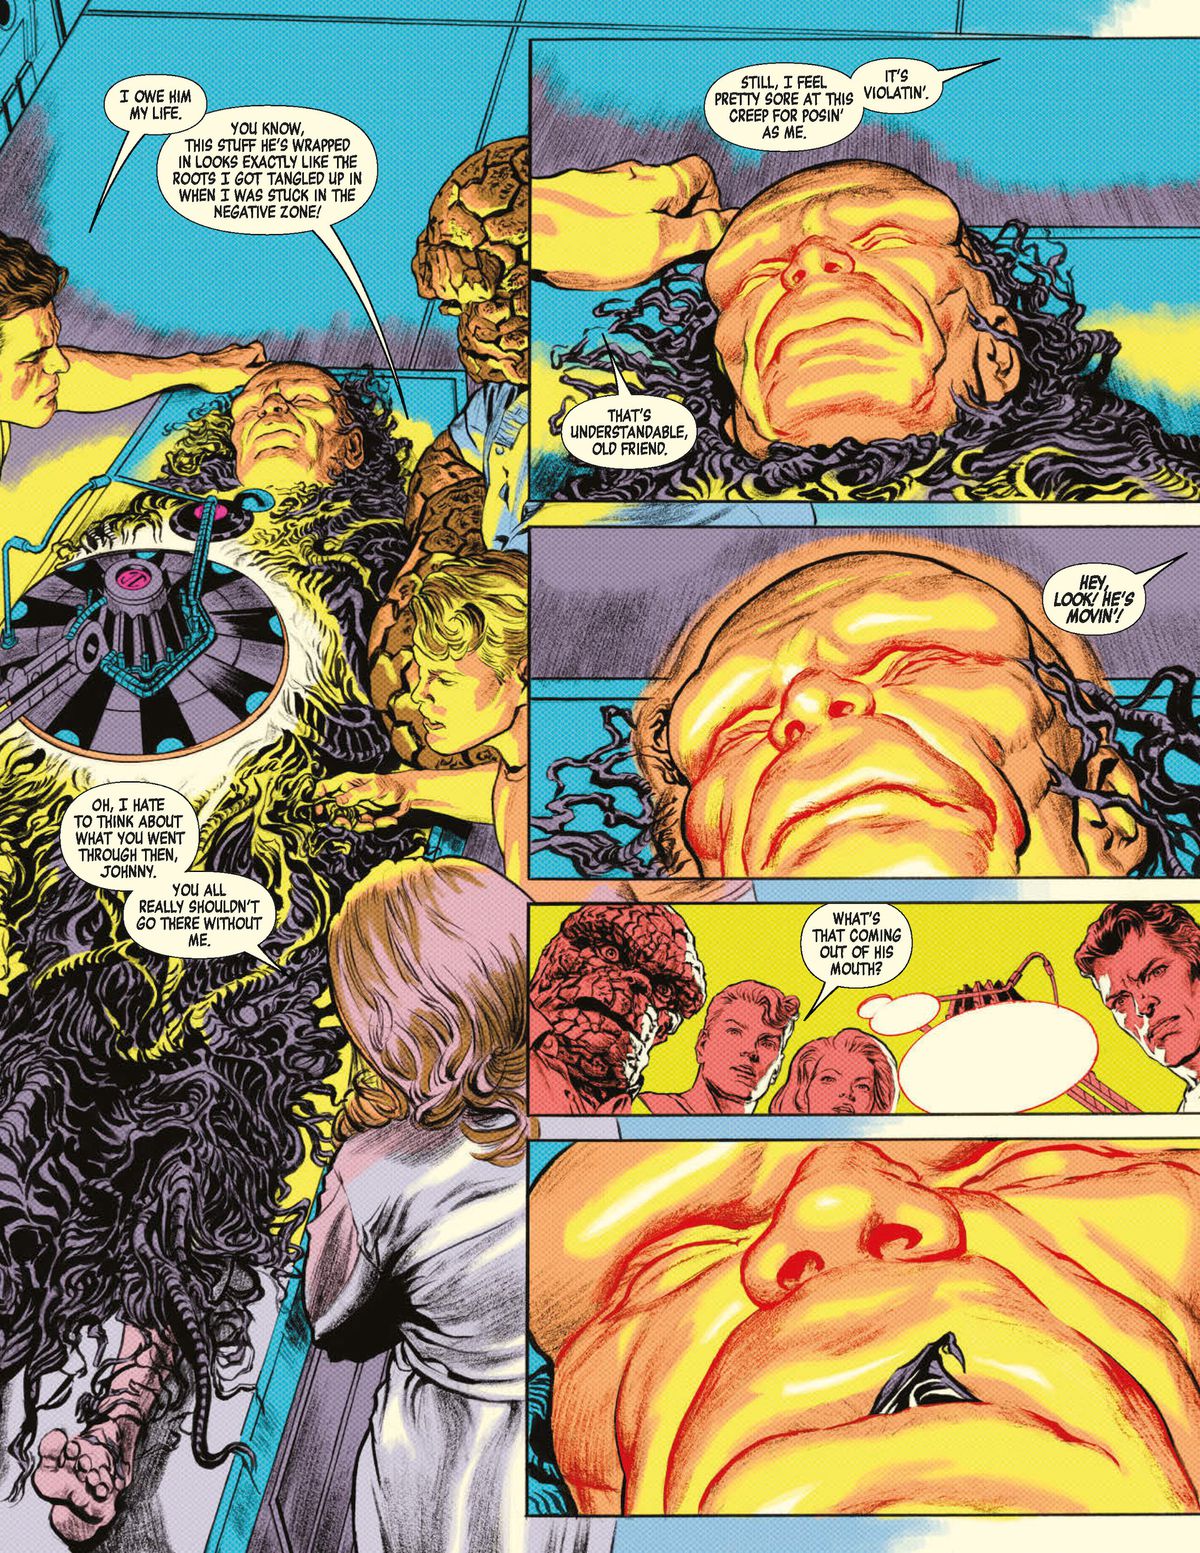 The Fantastic Four examine Ben Grimm’s Negative Zone doppelganer on a table. He’s cocooned in writhing black shapes, and one begins to peek out of his mouth.